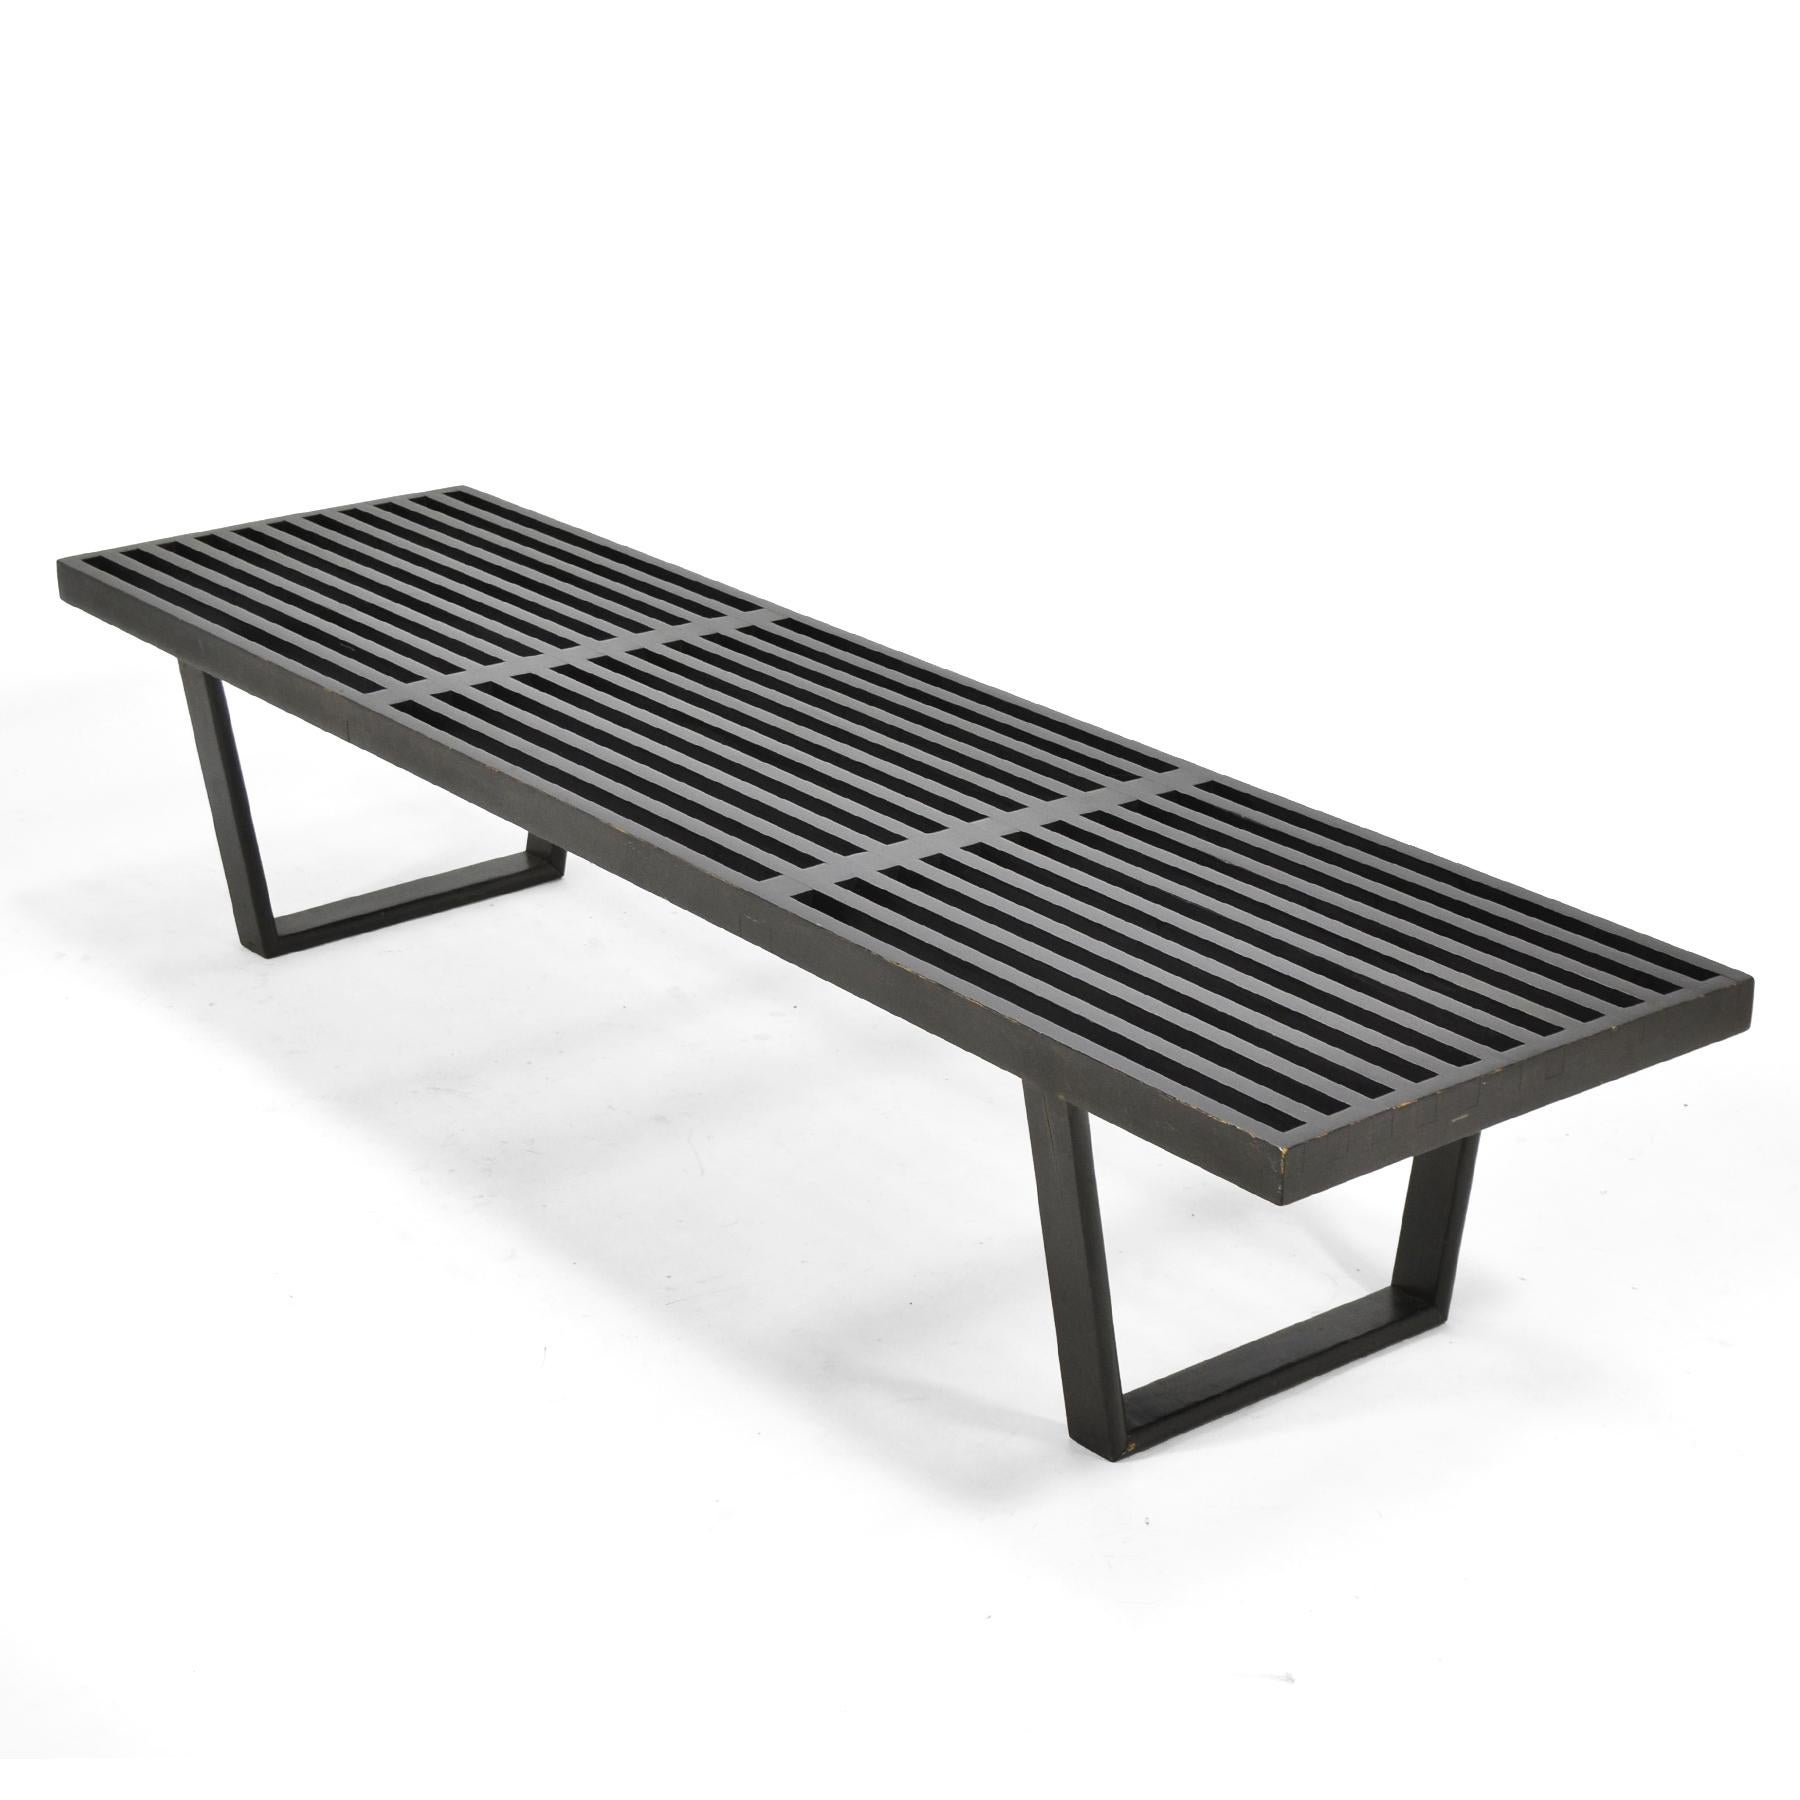 Introduced in 1946, the slat platform bench was one of Nelson's first designs for Herman Miller after becoming their design director. Intended to serve as a table, a seat, or a base for case goods, its countless imitations over the years are a